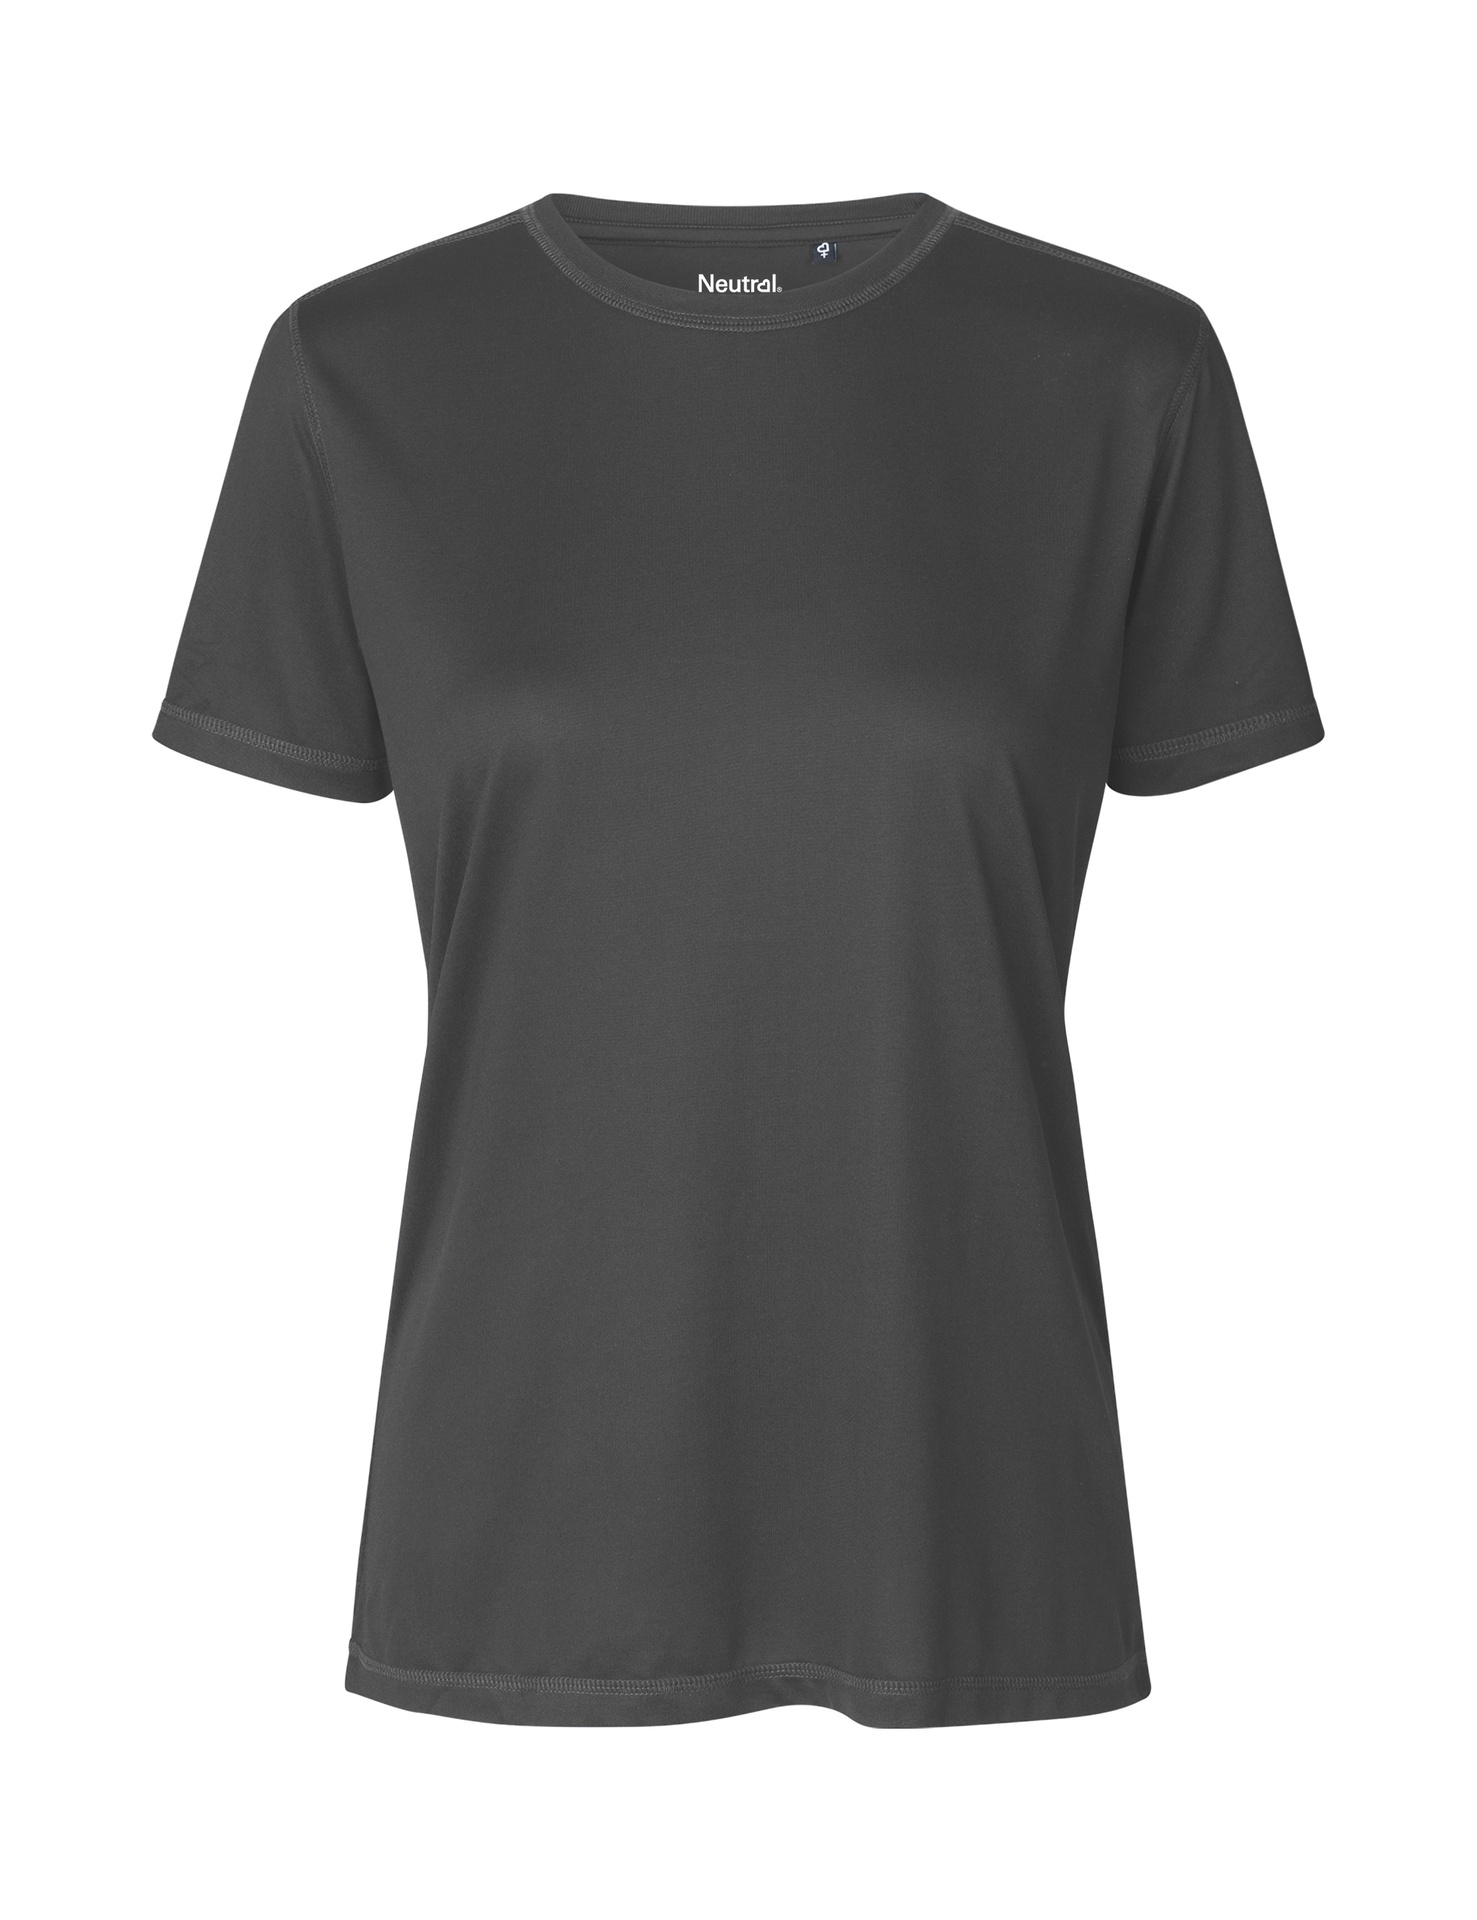 [PR/05219] Ladies Recycled Performance T-Shirt (Charcoal 06, L)